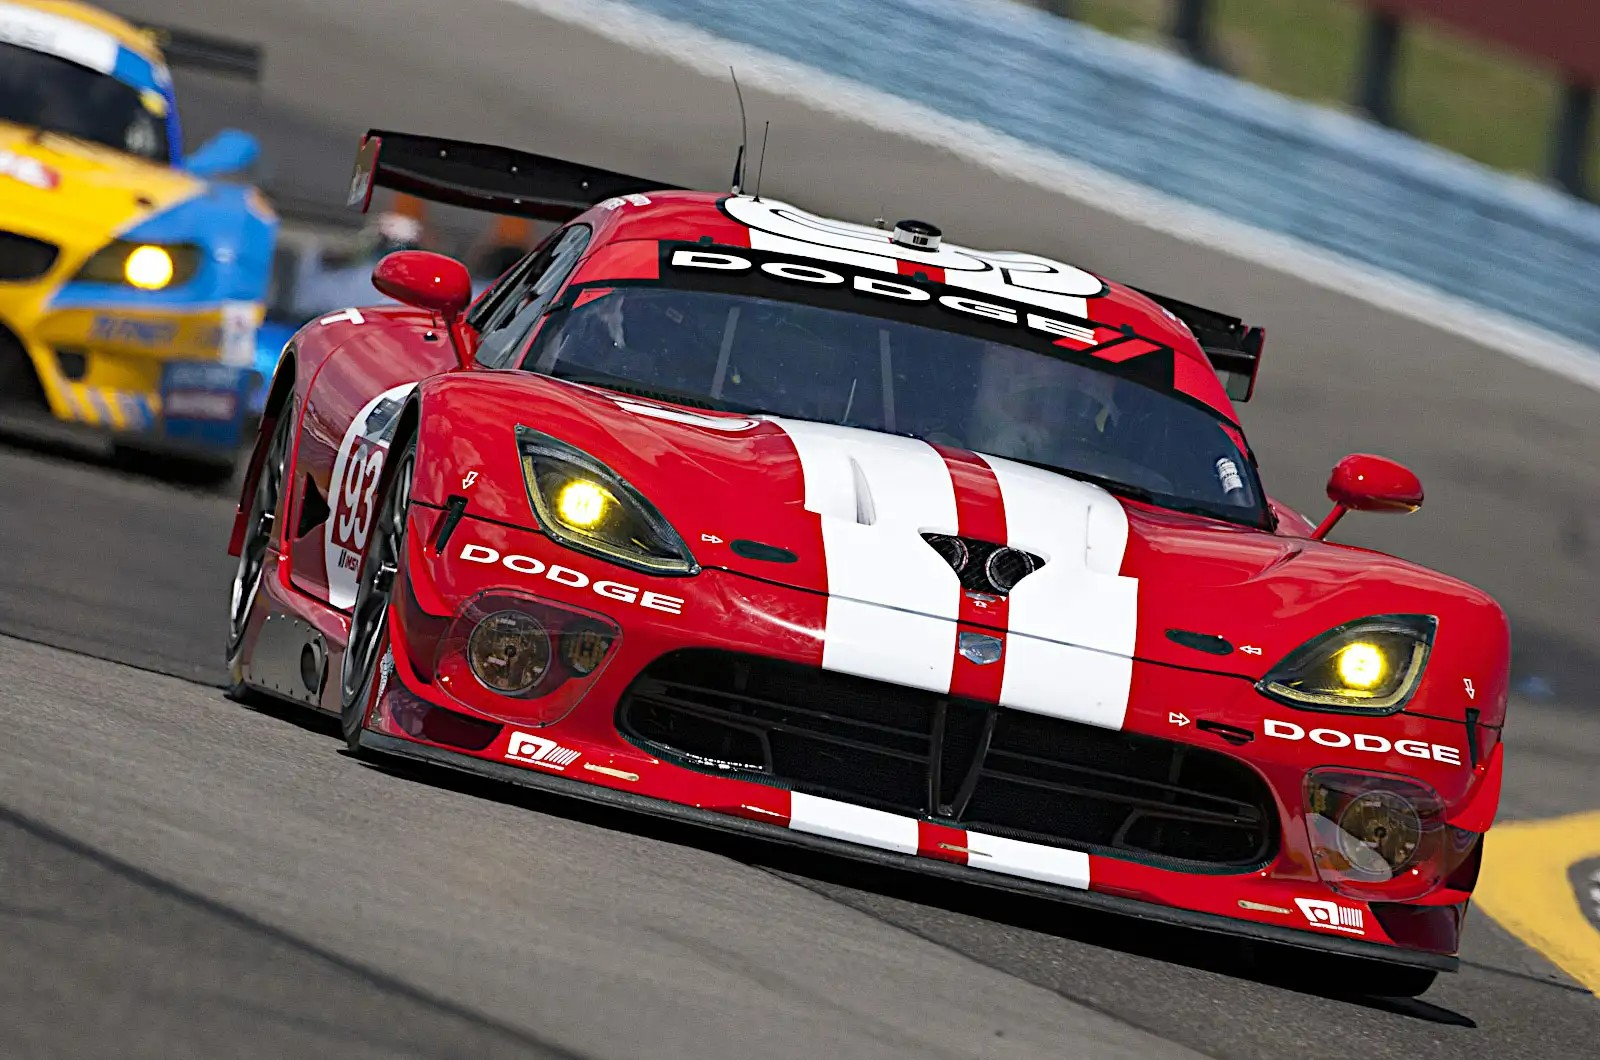 <p>The Dodge Viper GTS-R was a racing variant of the Dodge Viper developed in partnership with Chrysler, Oreca of France, and Reynard Motorsport of the UK. It is one of the most successful production-based racing efforts in history.</p><p>With international collaboration behind its design, the car excelled in the high-production based GT2 category. The GTS-R secured multiple championships, including five FIA GT World Championships, three consecutive Le Mans class victories, two American Le Mans Series Championships, and an overall victory at the 2000 Rolex 24 at Daytona.</p>